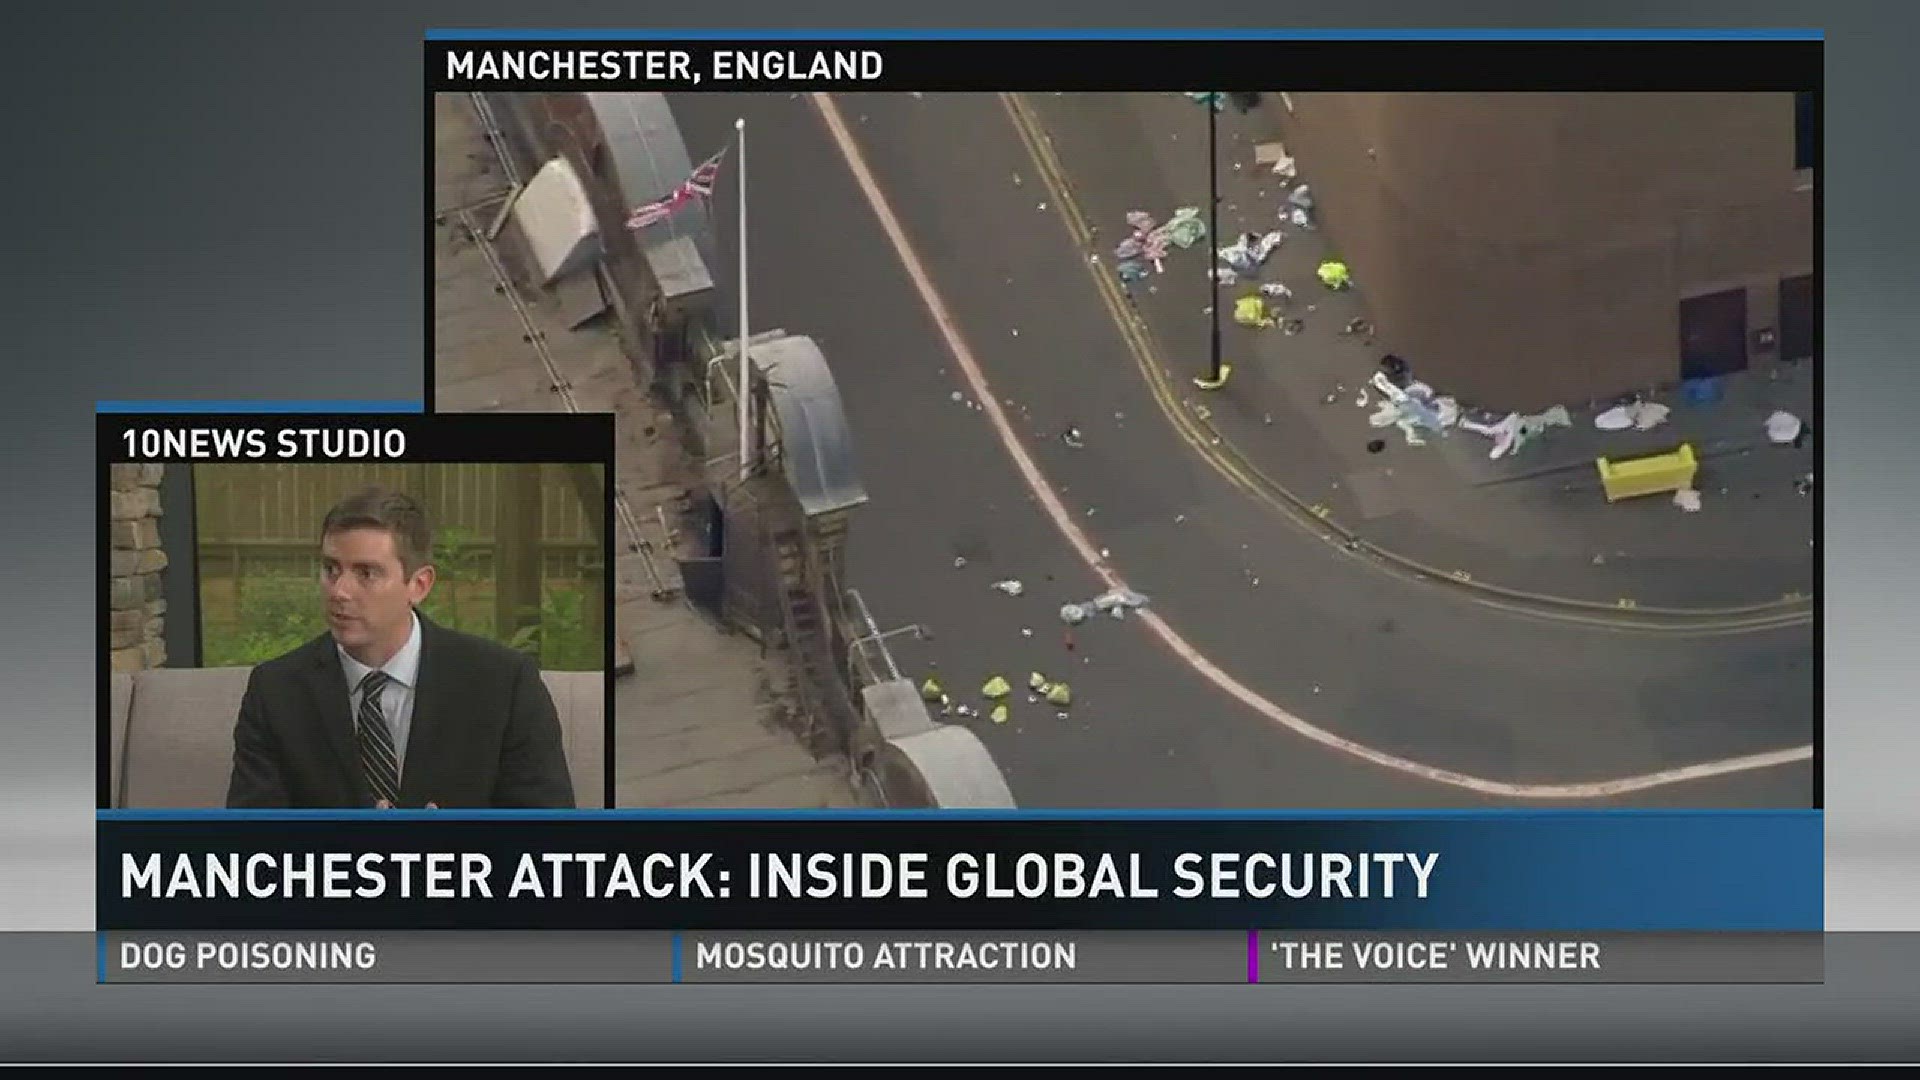 Dr. Eric Keels, a research fellow at the University of Tennessee specializing in global security, discusses global security in light of the terrorist attack at a concert in Manchester, England.